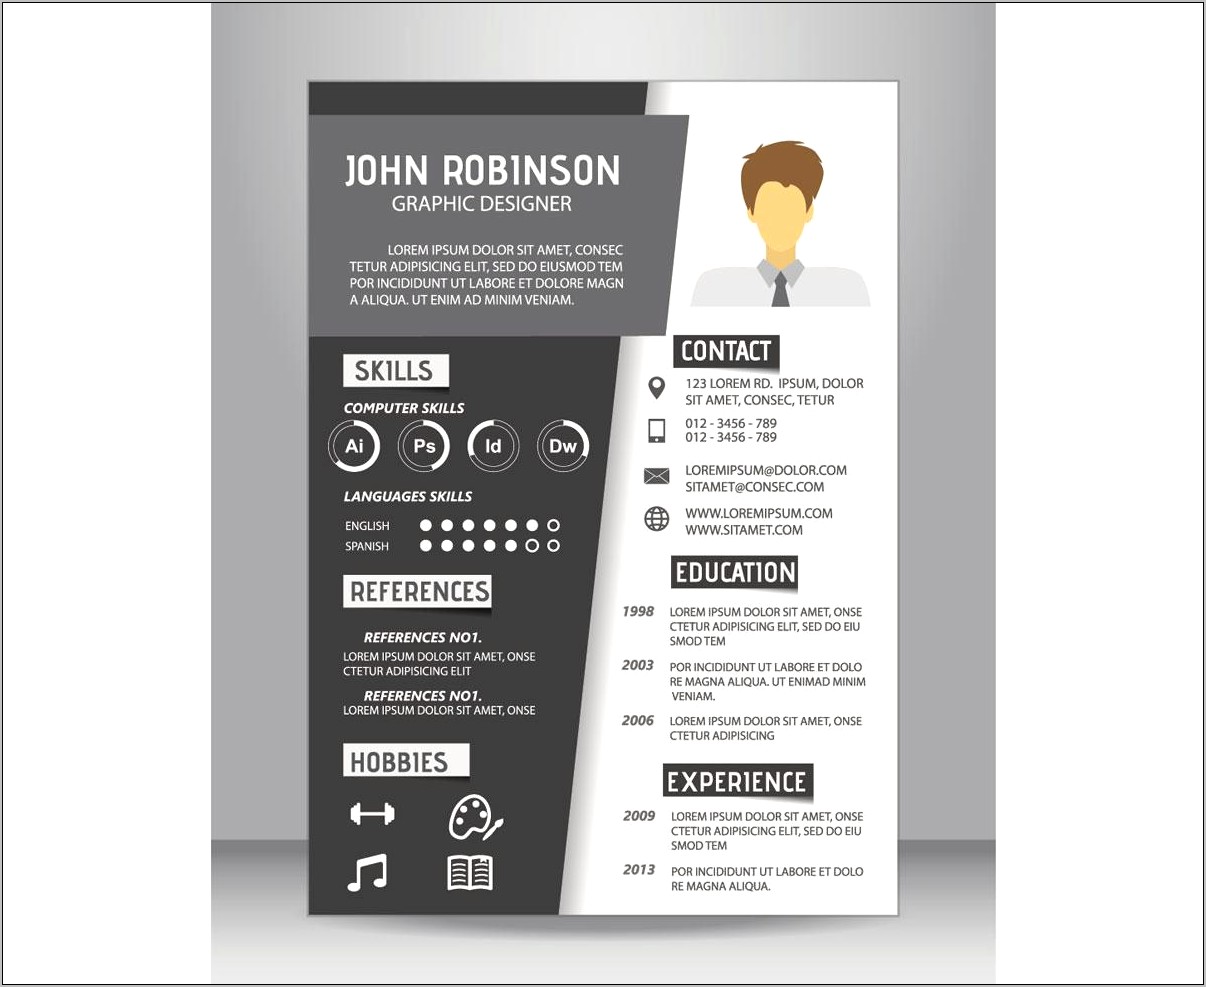 Sample Creative Resume For College Application